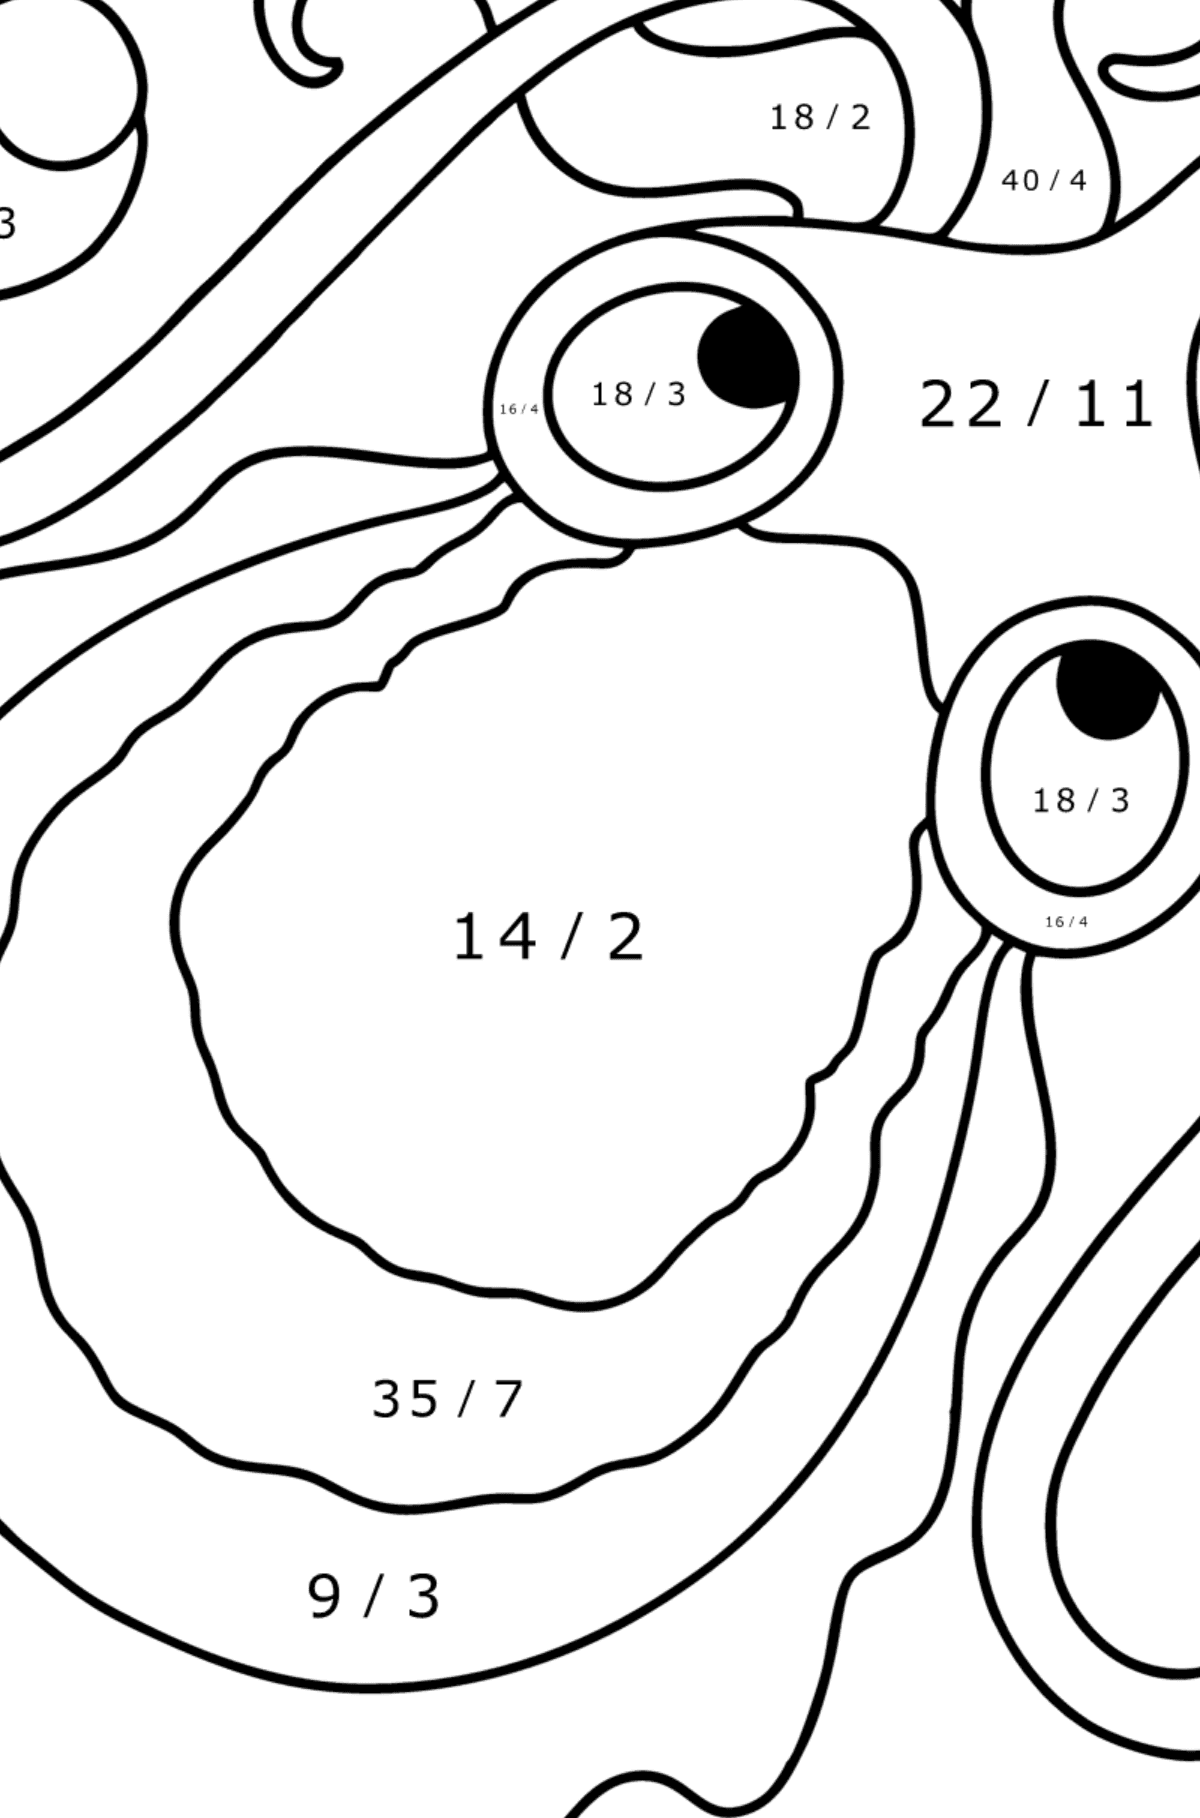 Cuttlefish coloring page - Math Coloring - Division for Kids